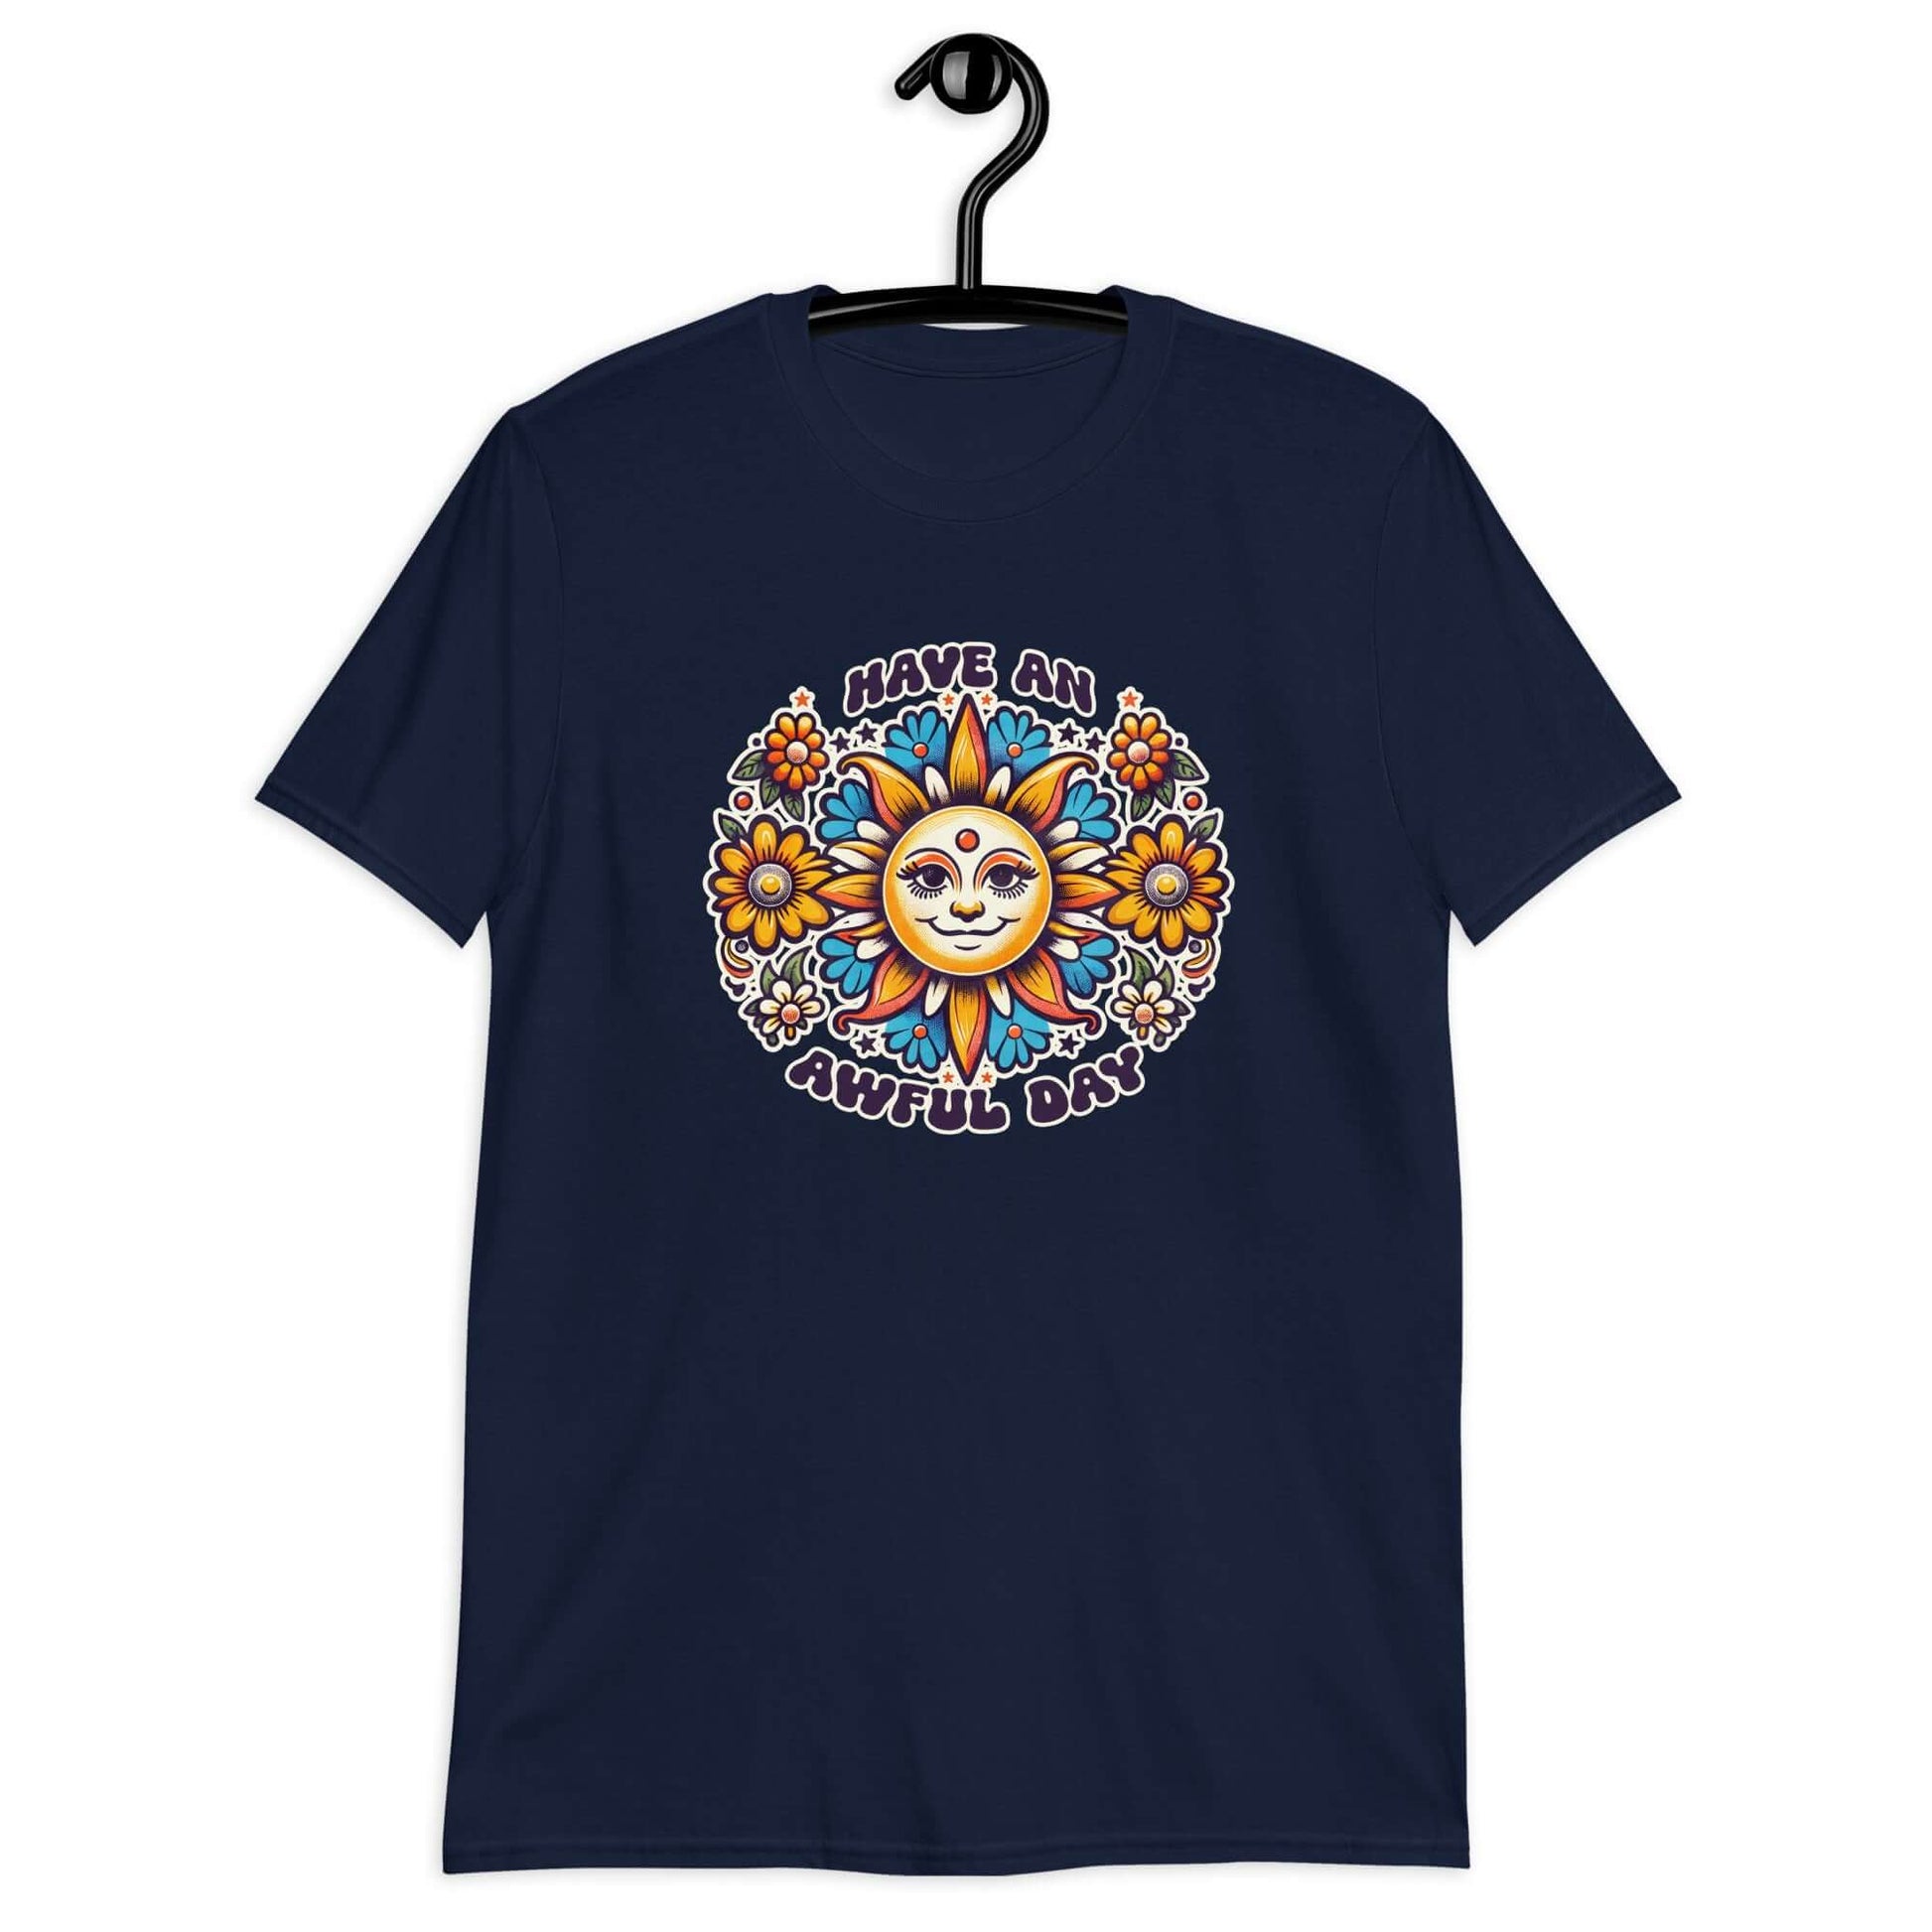 Navy blue t-shirt with a sun graphic and the phrase Have an awful day printed on the front.